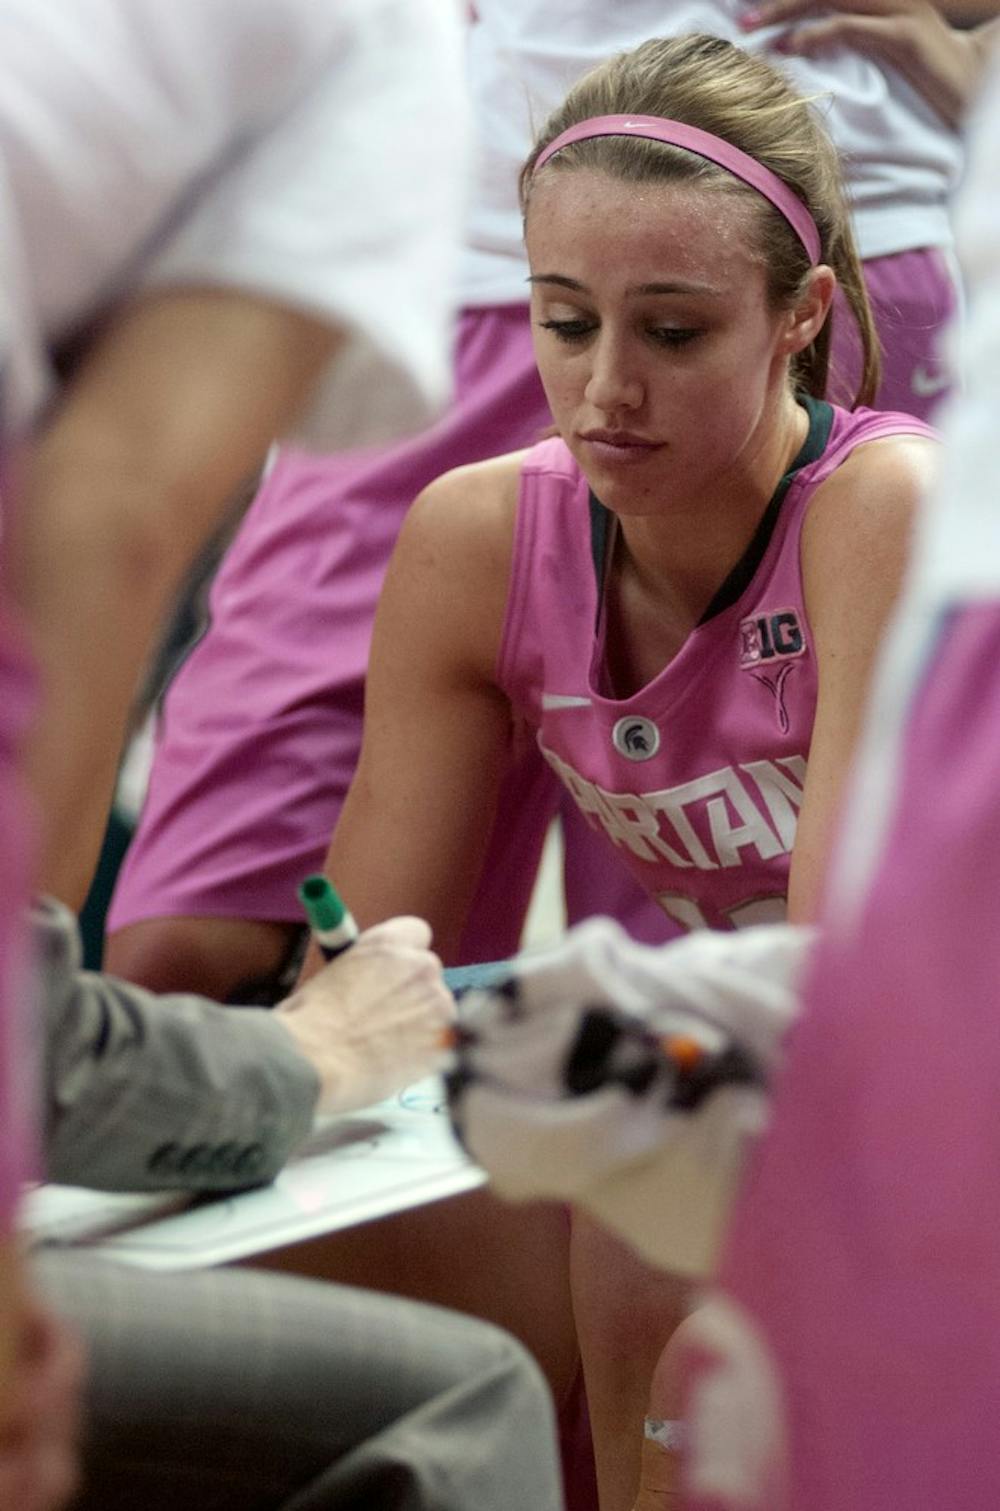 	<p>Senior forward Annalise Pickrel looks at head coach Suzy Merchant&#8217;s whiteboard during a time out Feb. 15, 2014, during the game against Ohio State at Breslin Center. The Spartans defeated the Buckeyes, 70-49. Julia Nagy/The State News</p>